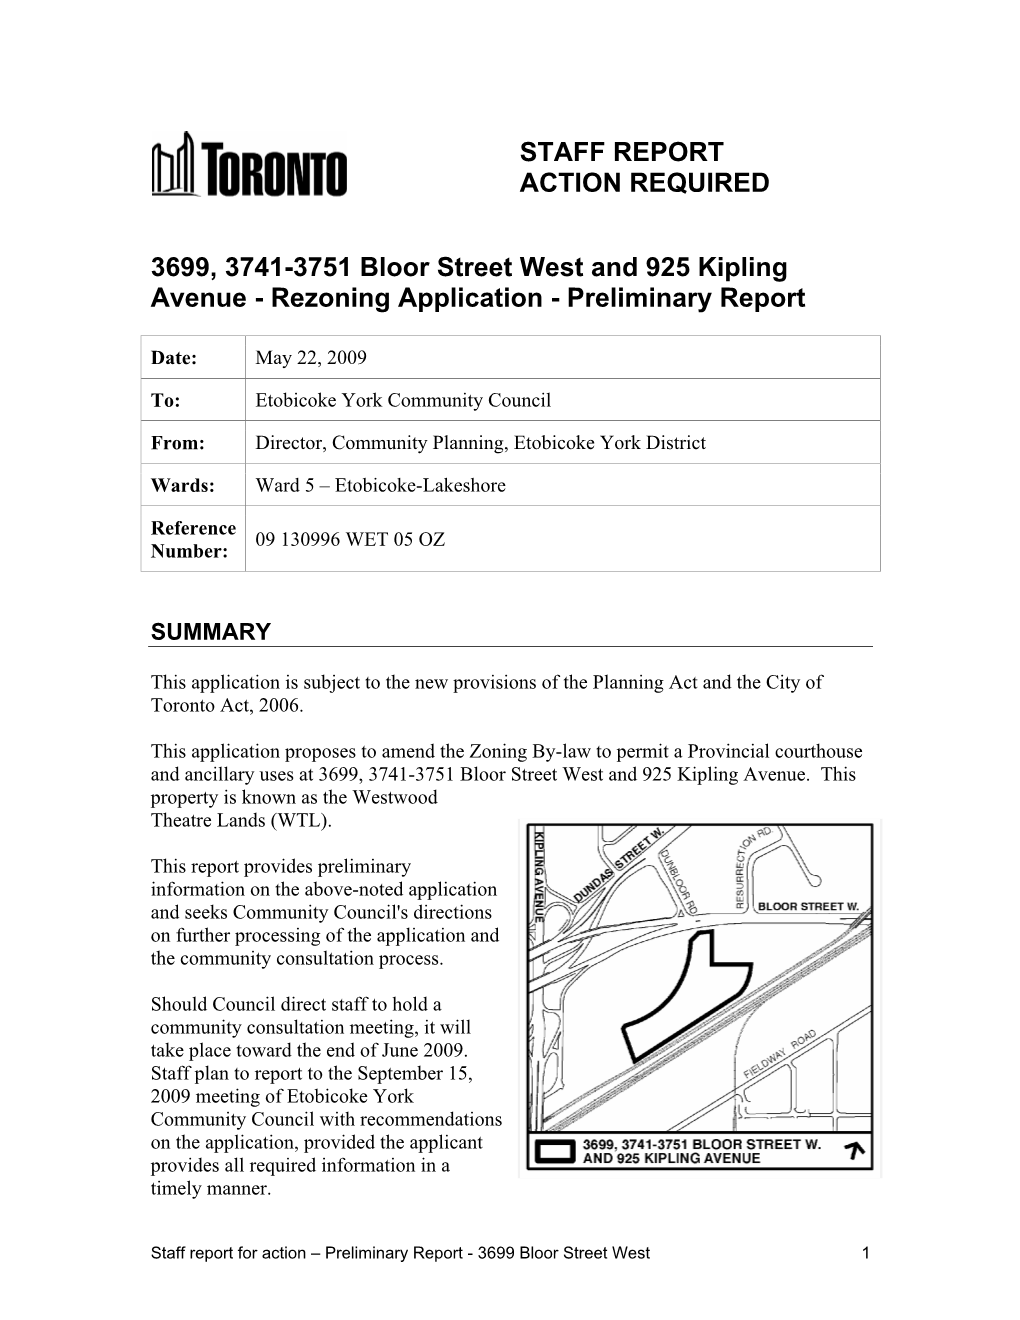 3699, 3741-3751 Bloor Street West and 925 Kipling Avenue - Rezoning Application - Preliminary Report